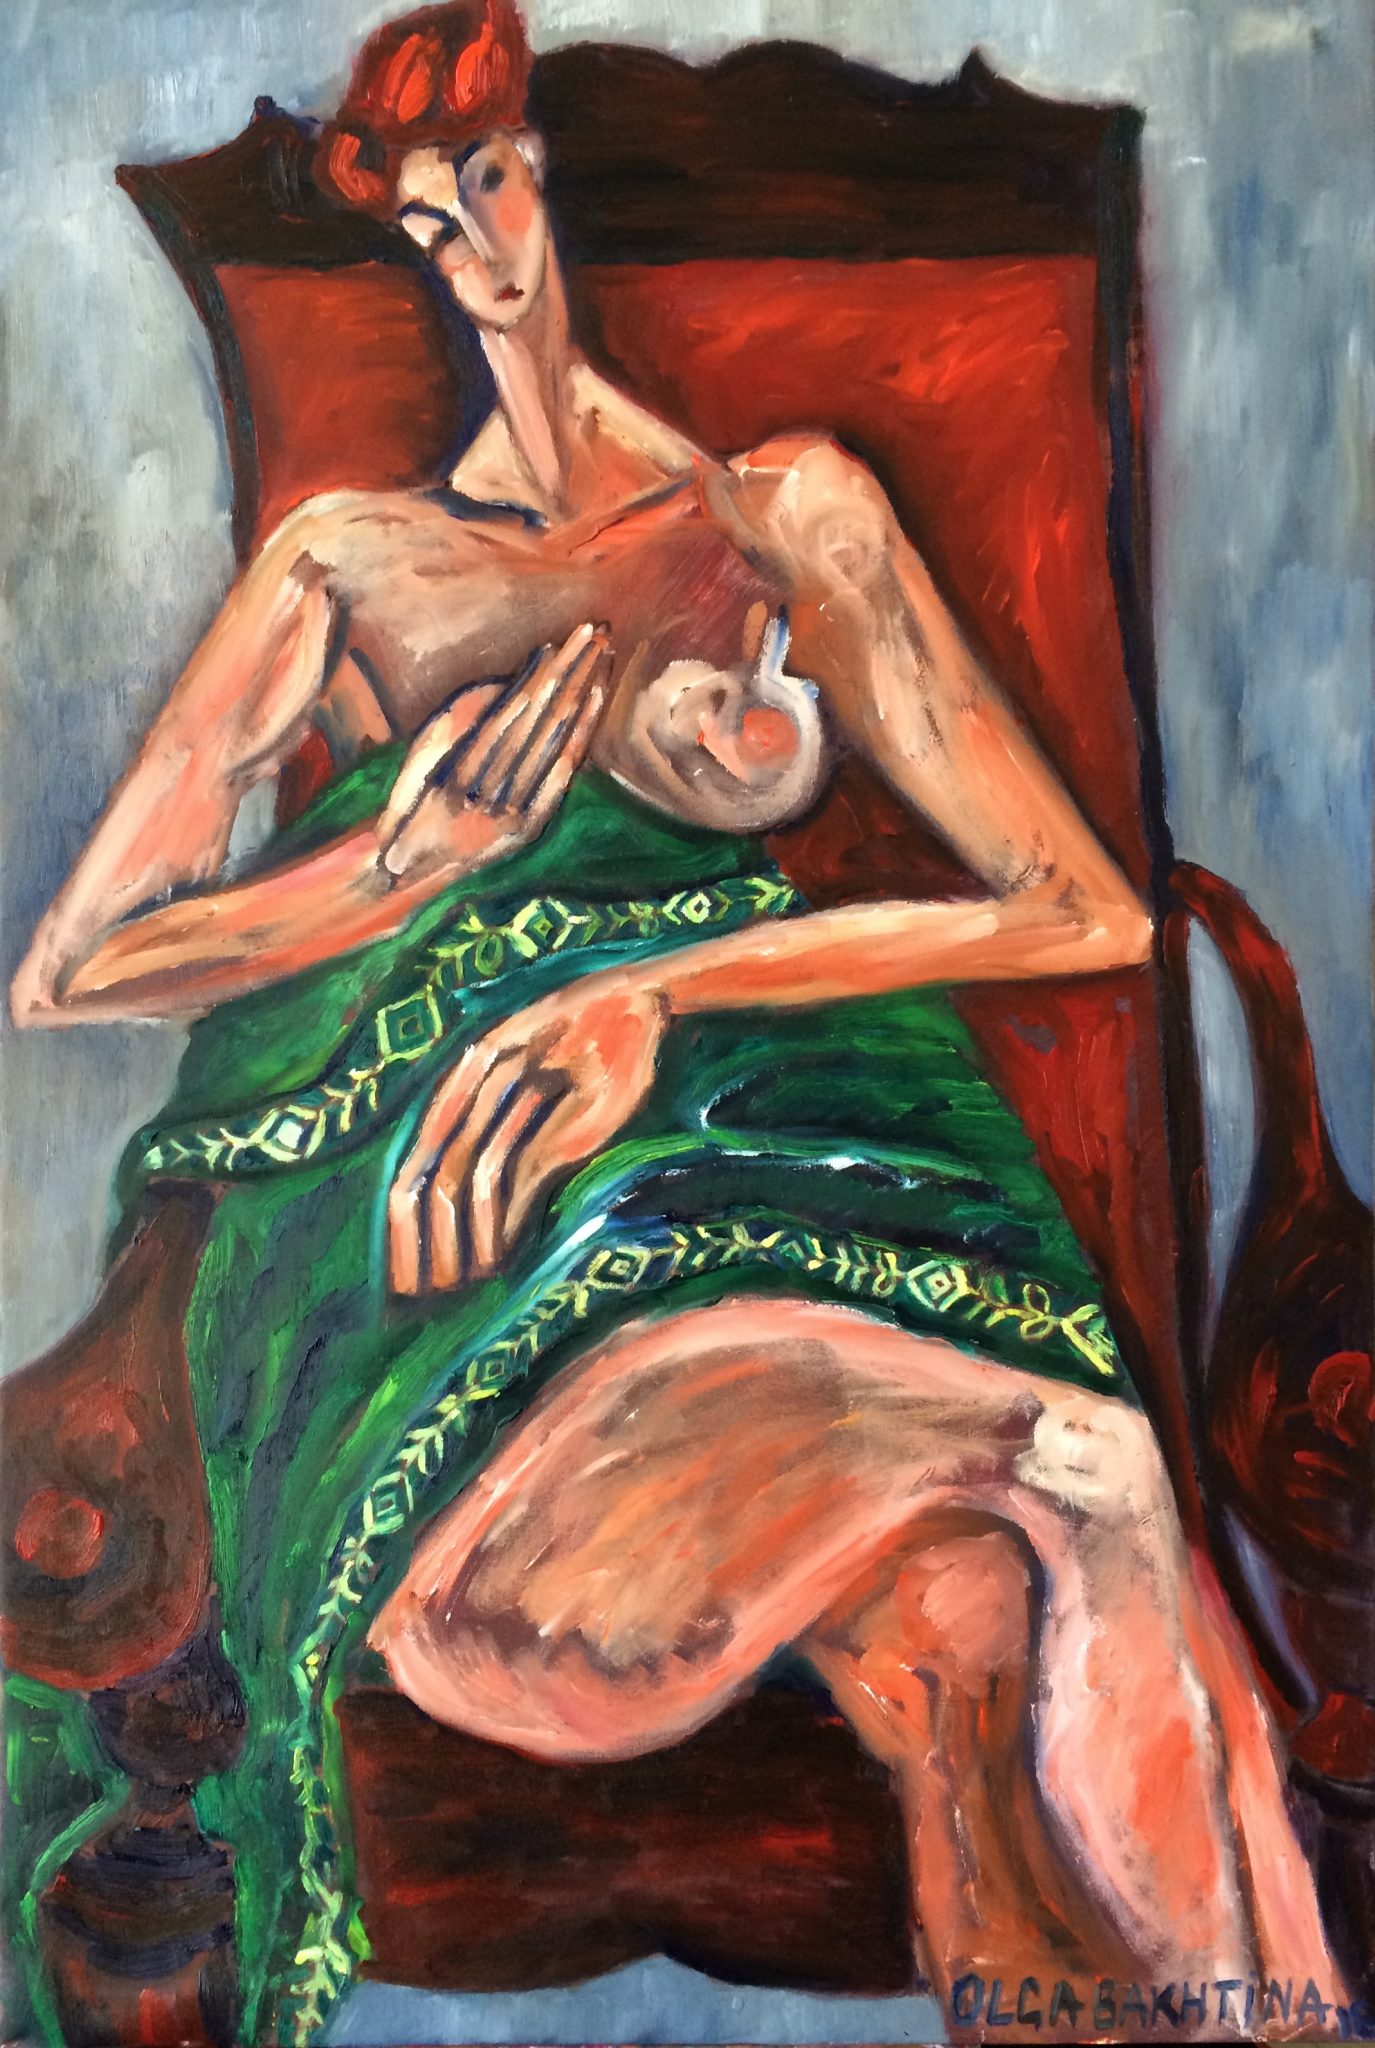 Girl in a red chair painting | Olga Bakhtina